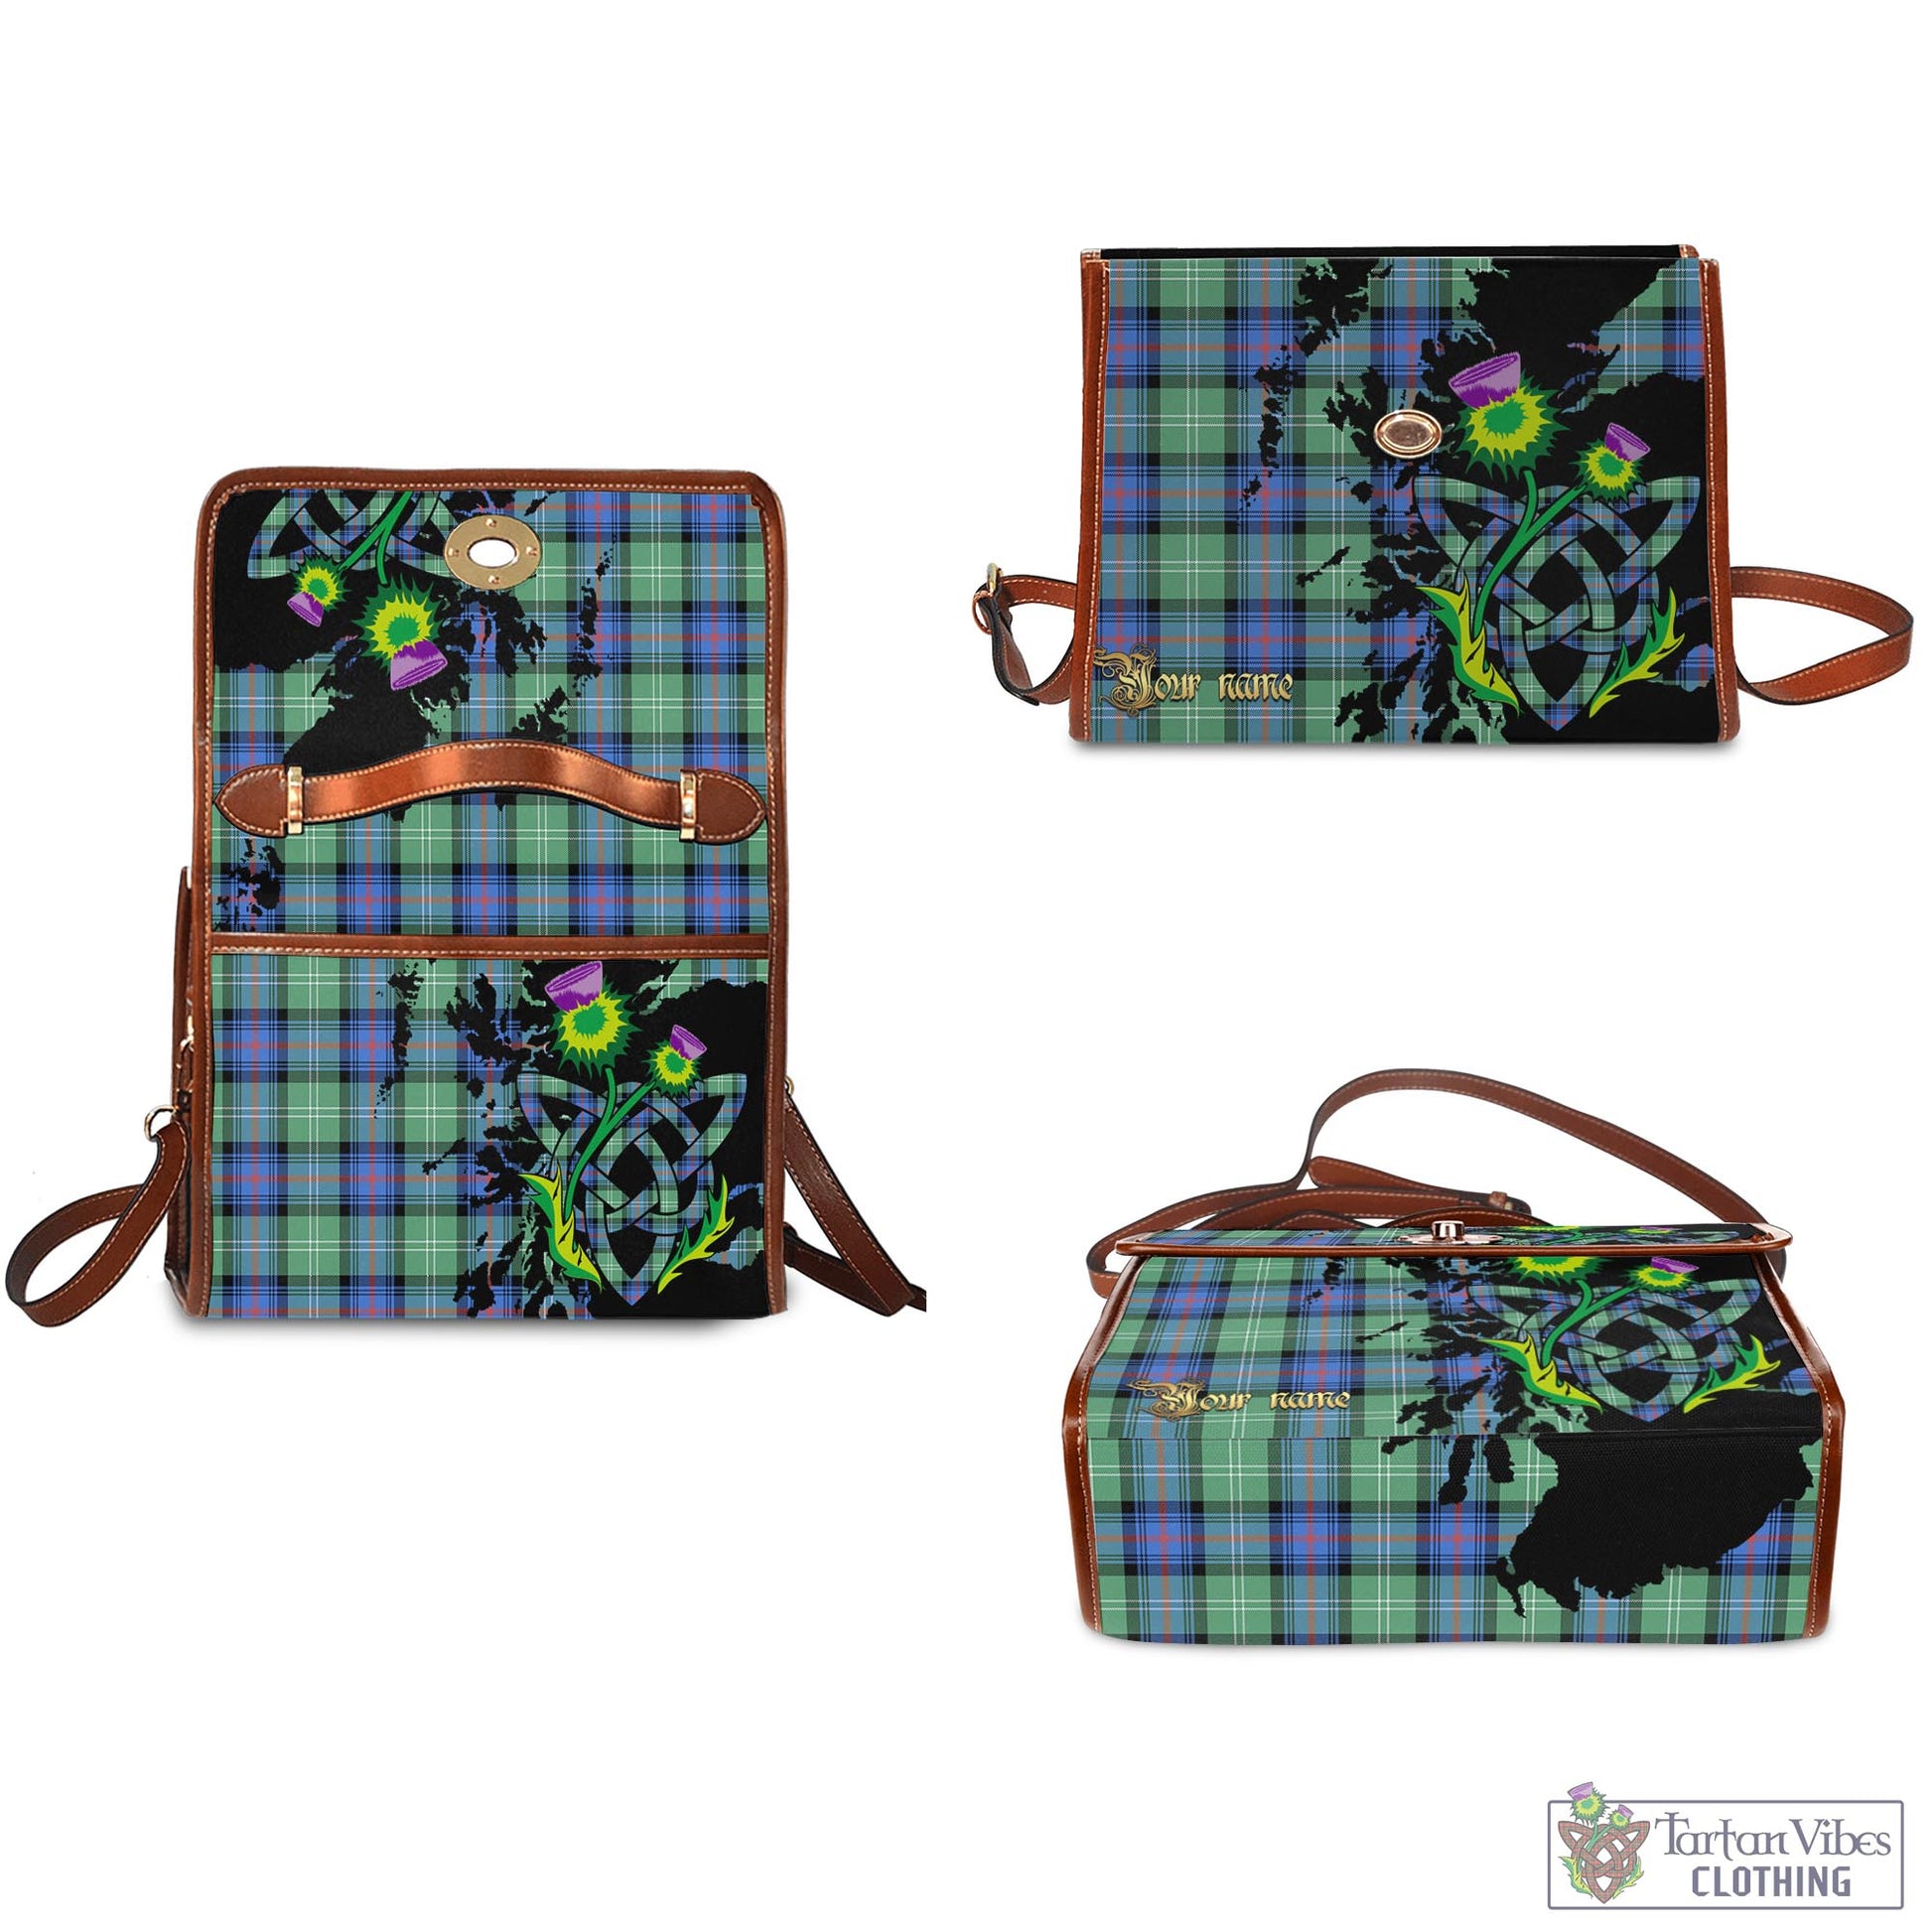 Tartan Vibes Clothing Sutherland Ancient Tartan Waterproof Canvas Bag with Scotland Map and Thistle Celtic Accents